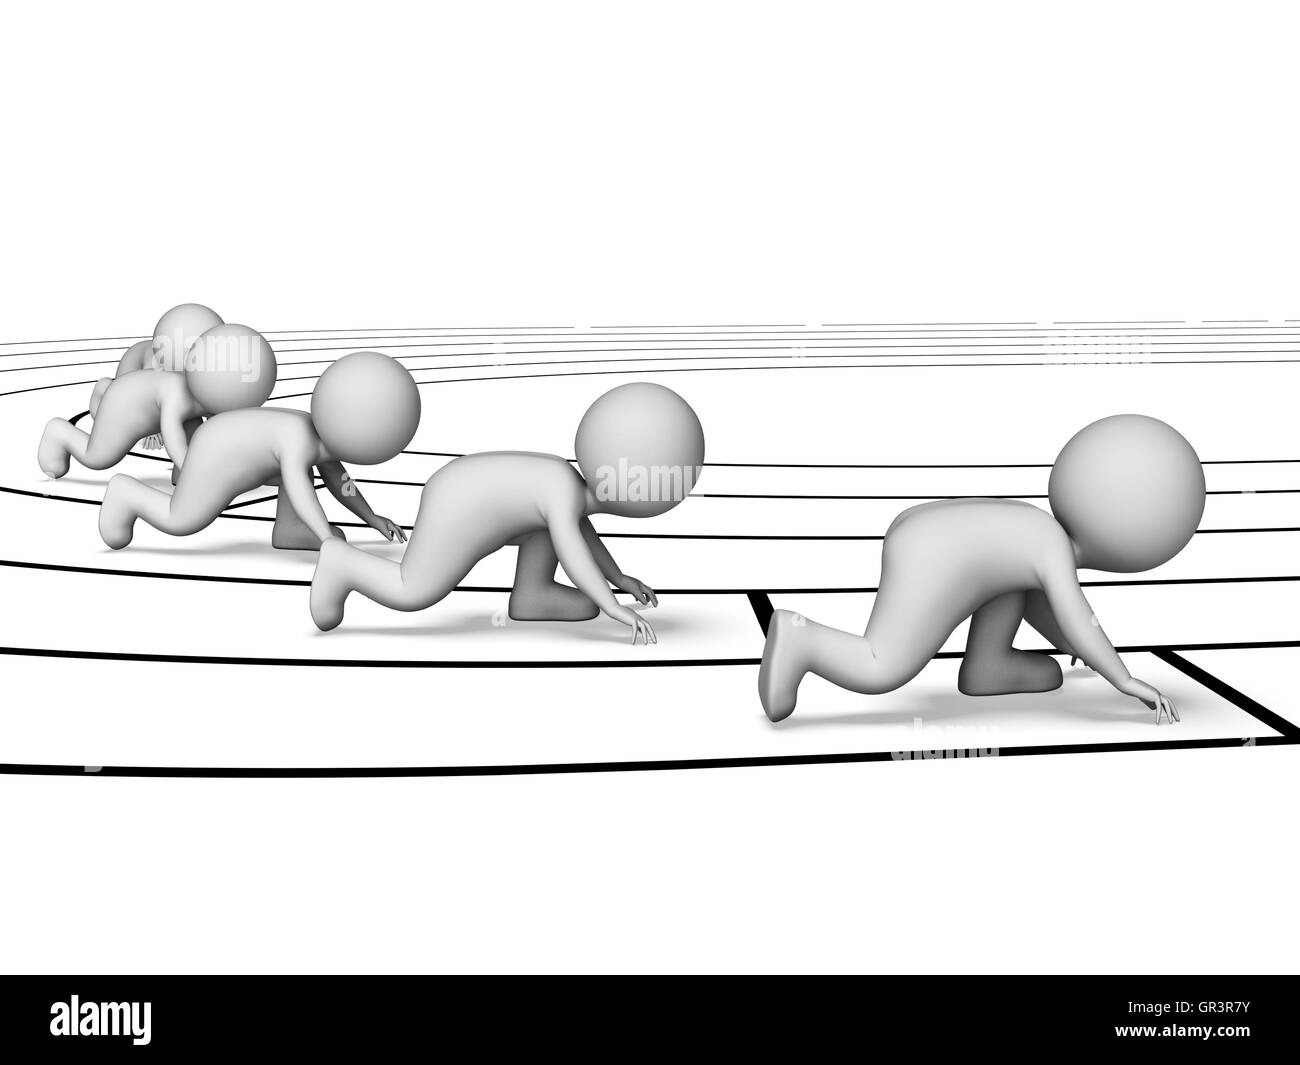 Characters Running Indicating Athletics Sprinting And Athletic 3d Rendering Stock Photo